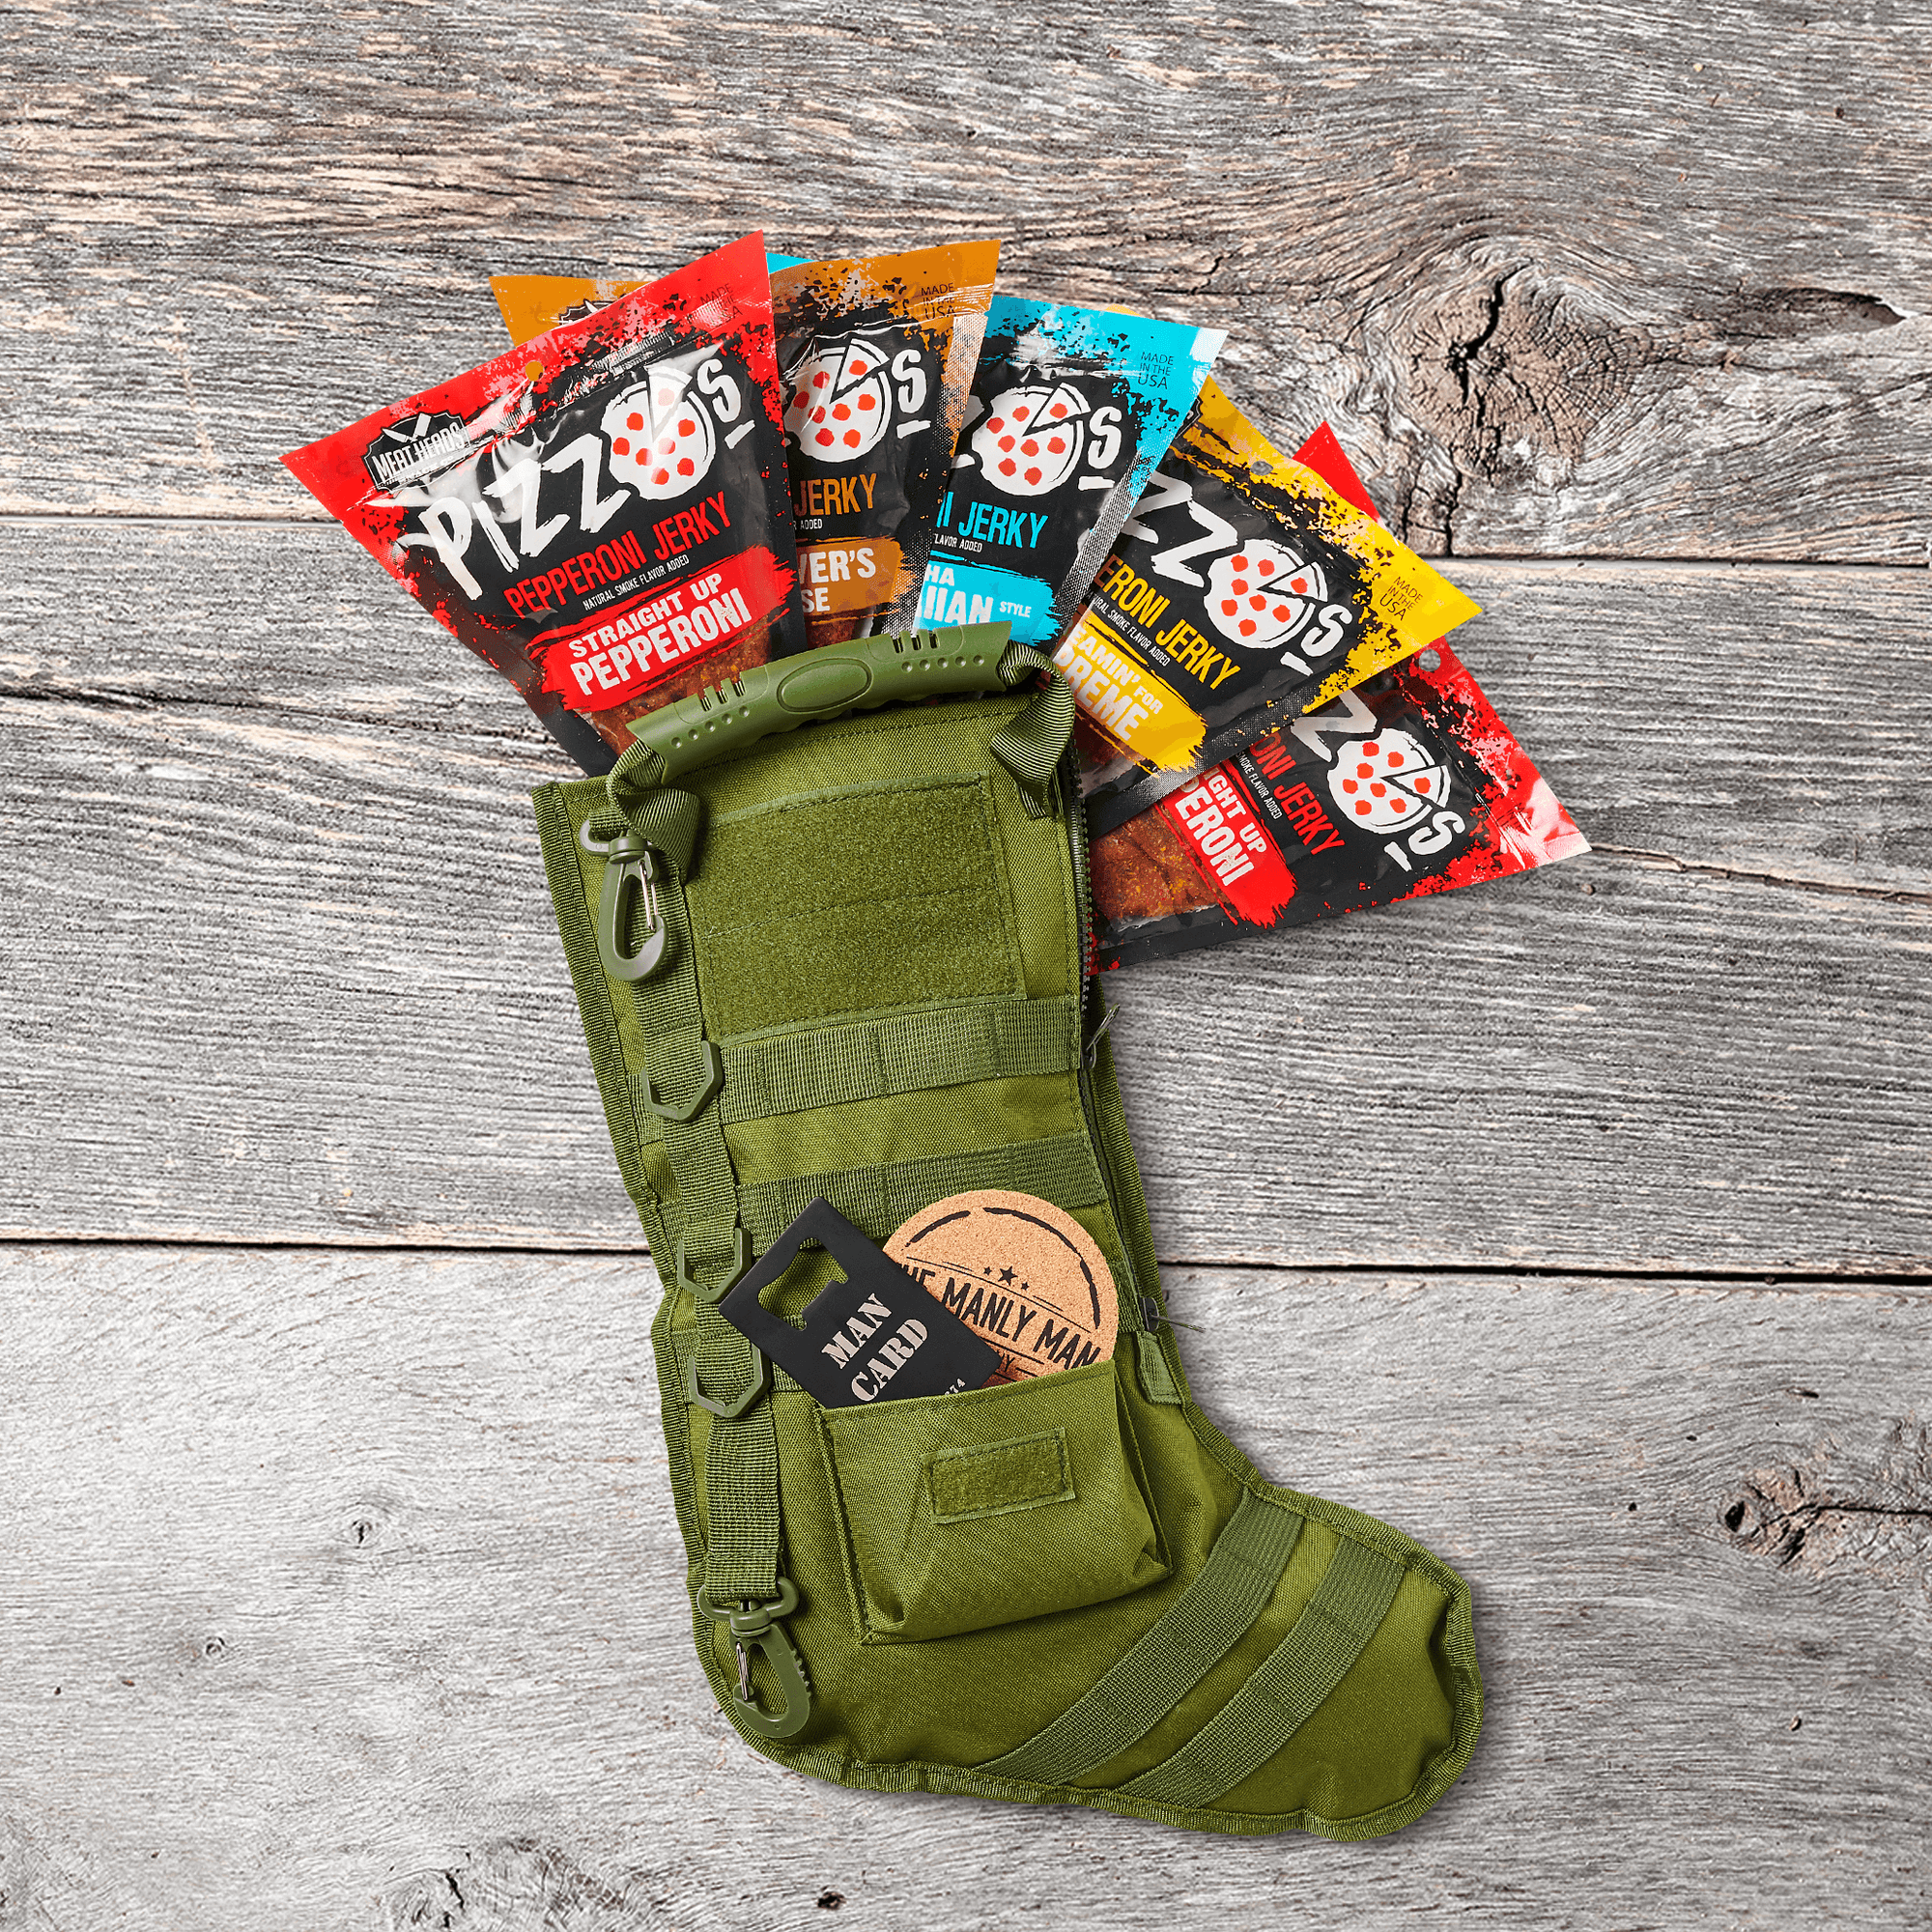 Manly Christmas stocking filled with pizza jerky and various stocking stuffers for men